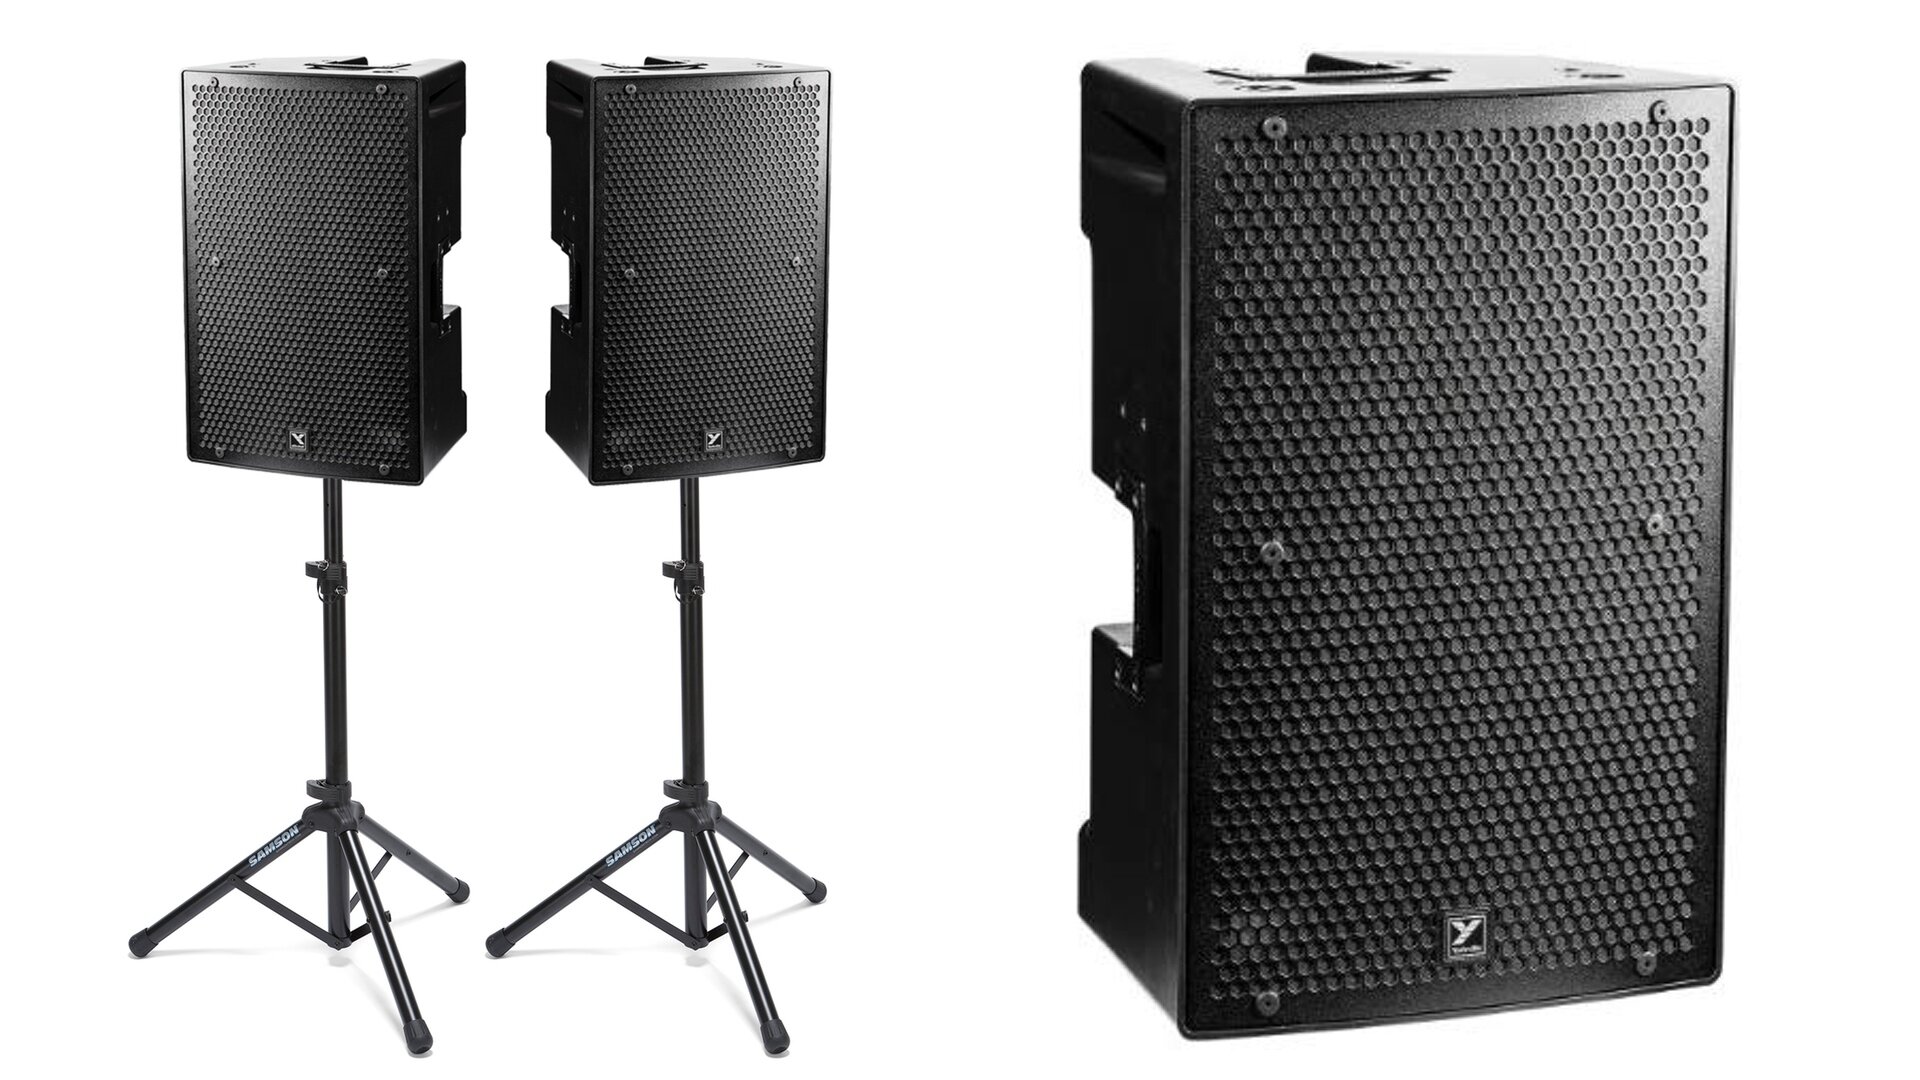 Large 15%22 powered loud speaker for hire PS15p.jpg